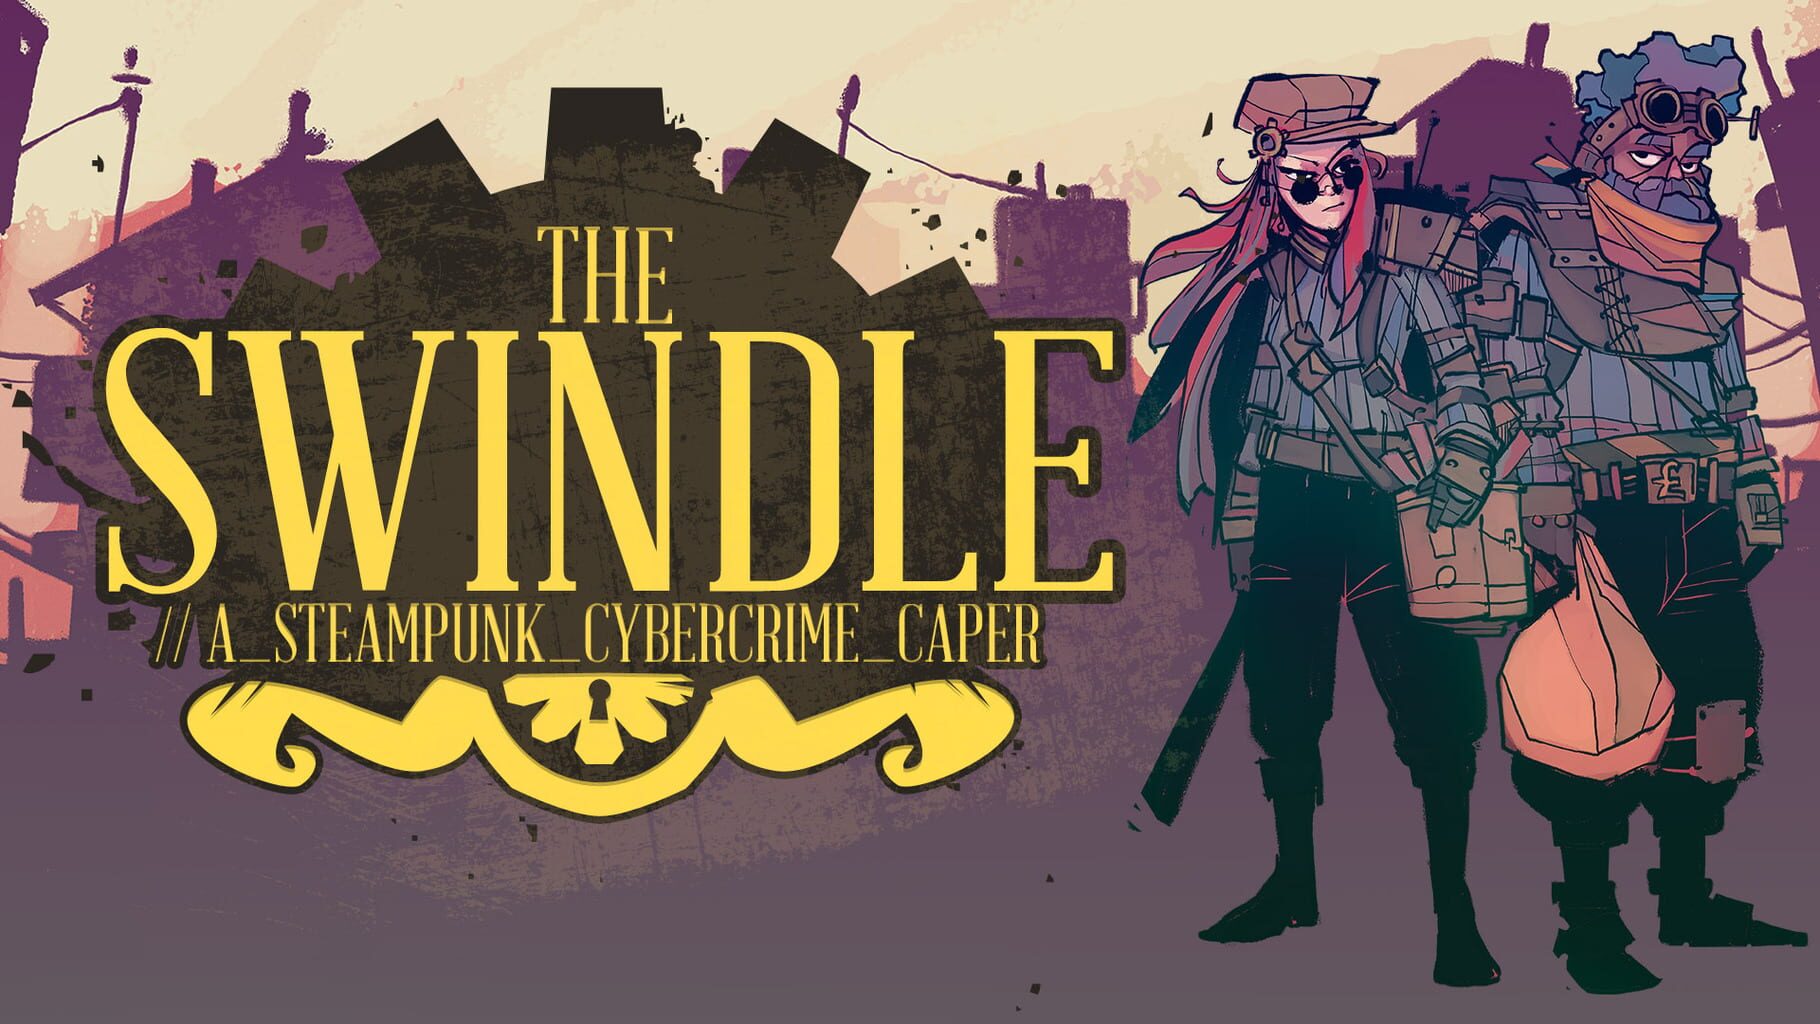 Artwork for The Swindle